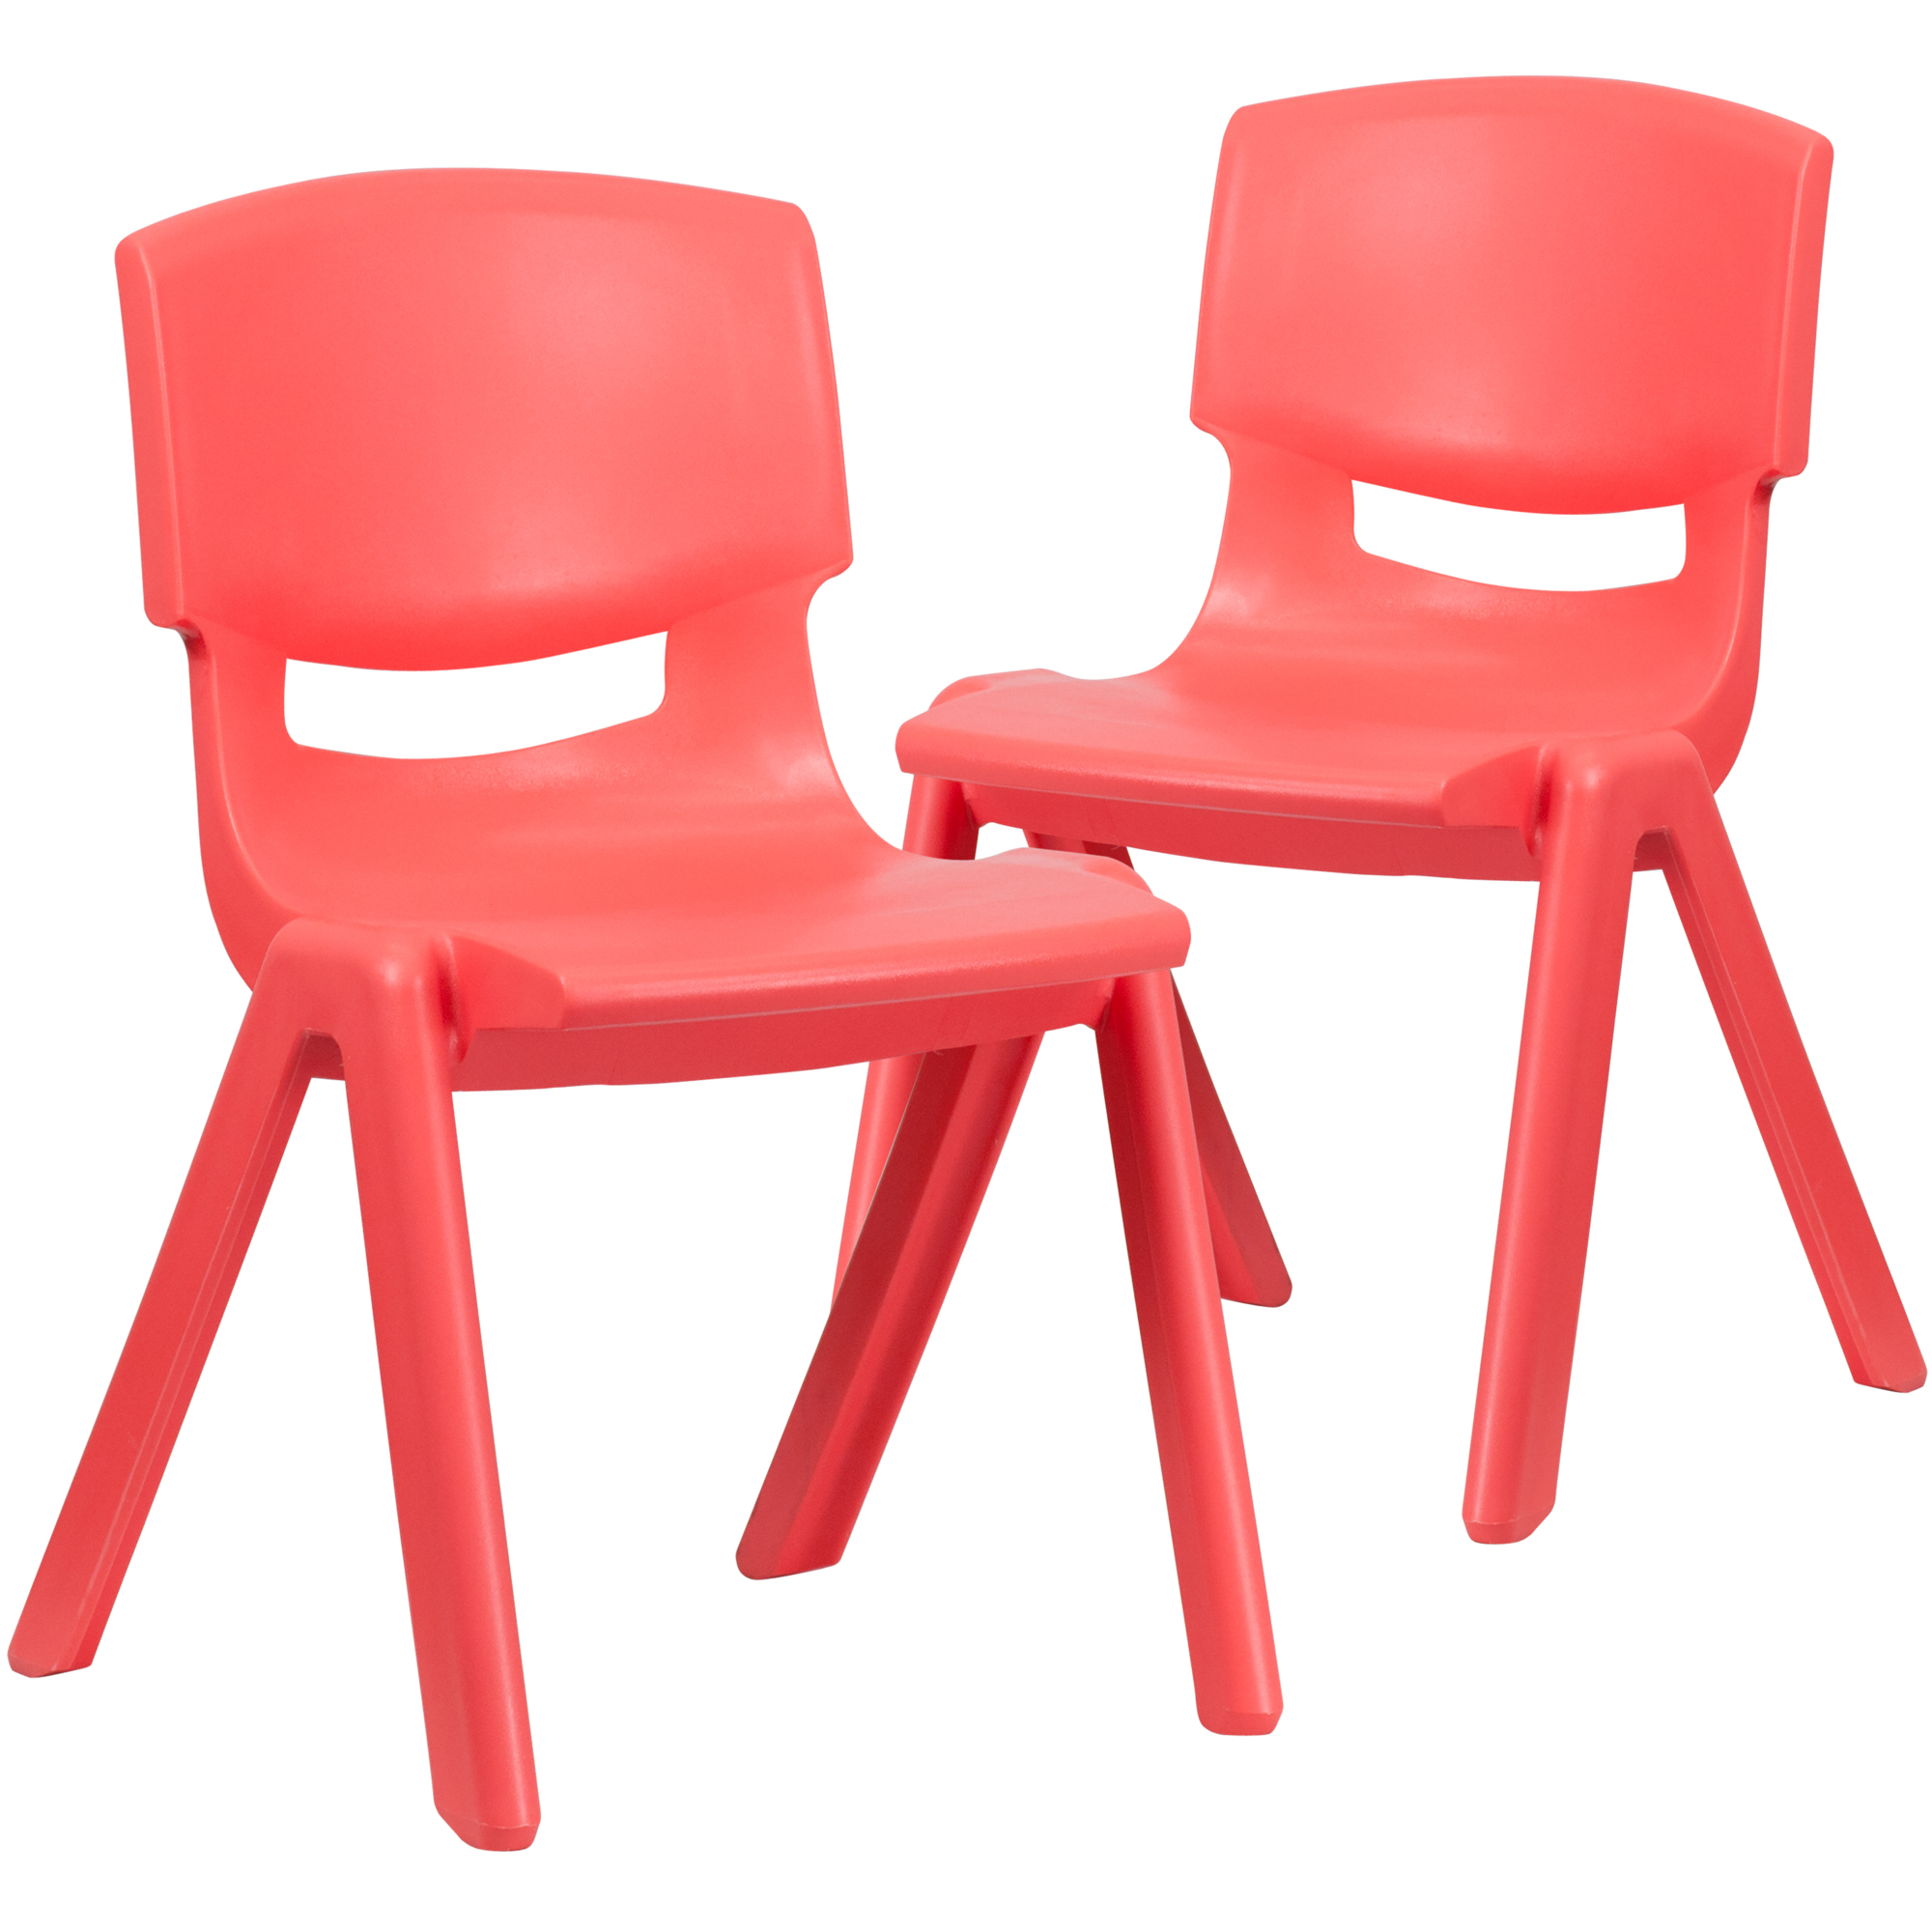 Flash Furniture, 2 Pack Red Plastic Stack School Chair-15.5Inch H Seat, Primary Color Red, Included (qty.) 2, Model 2YUYCX005RED